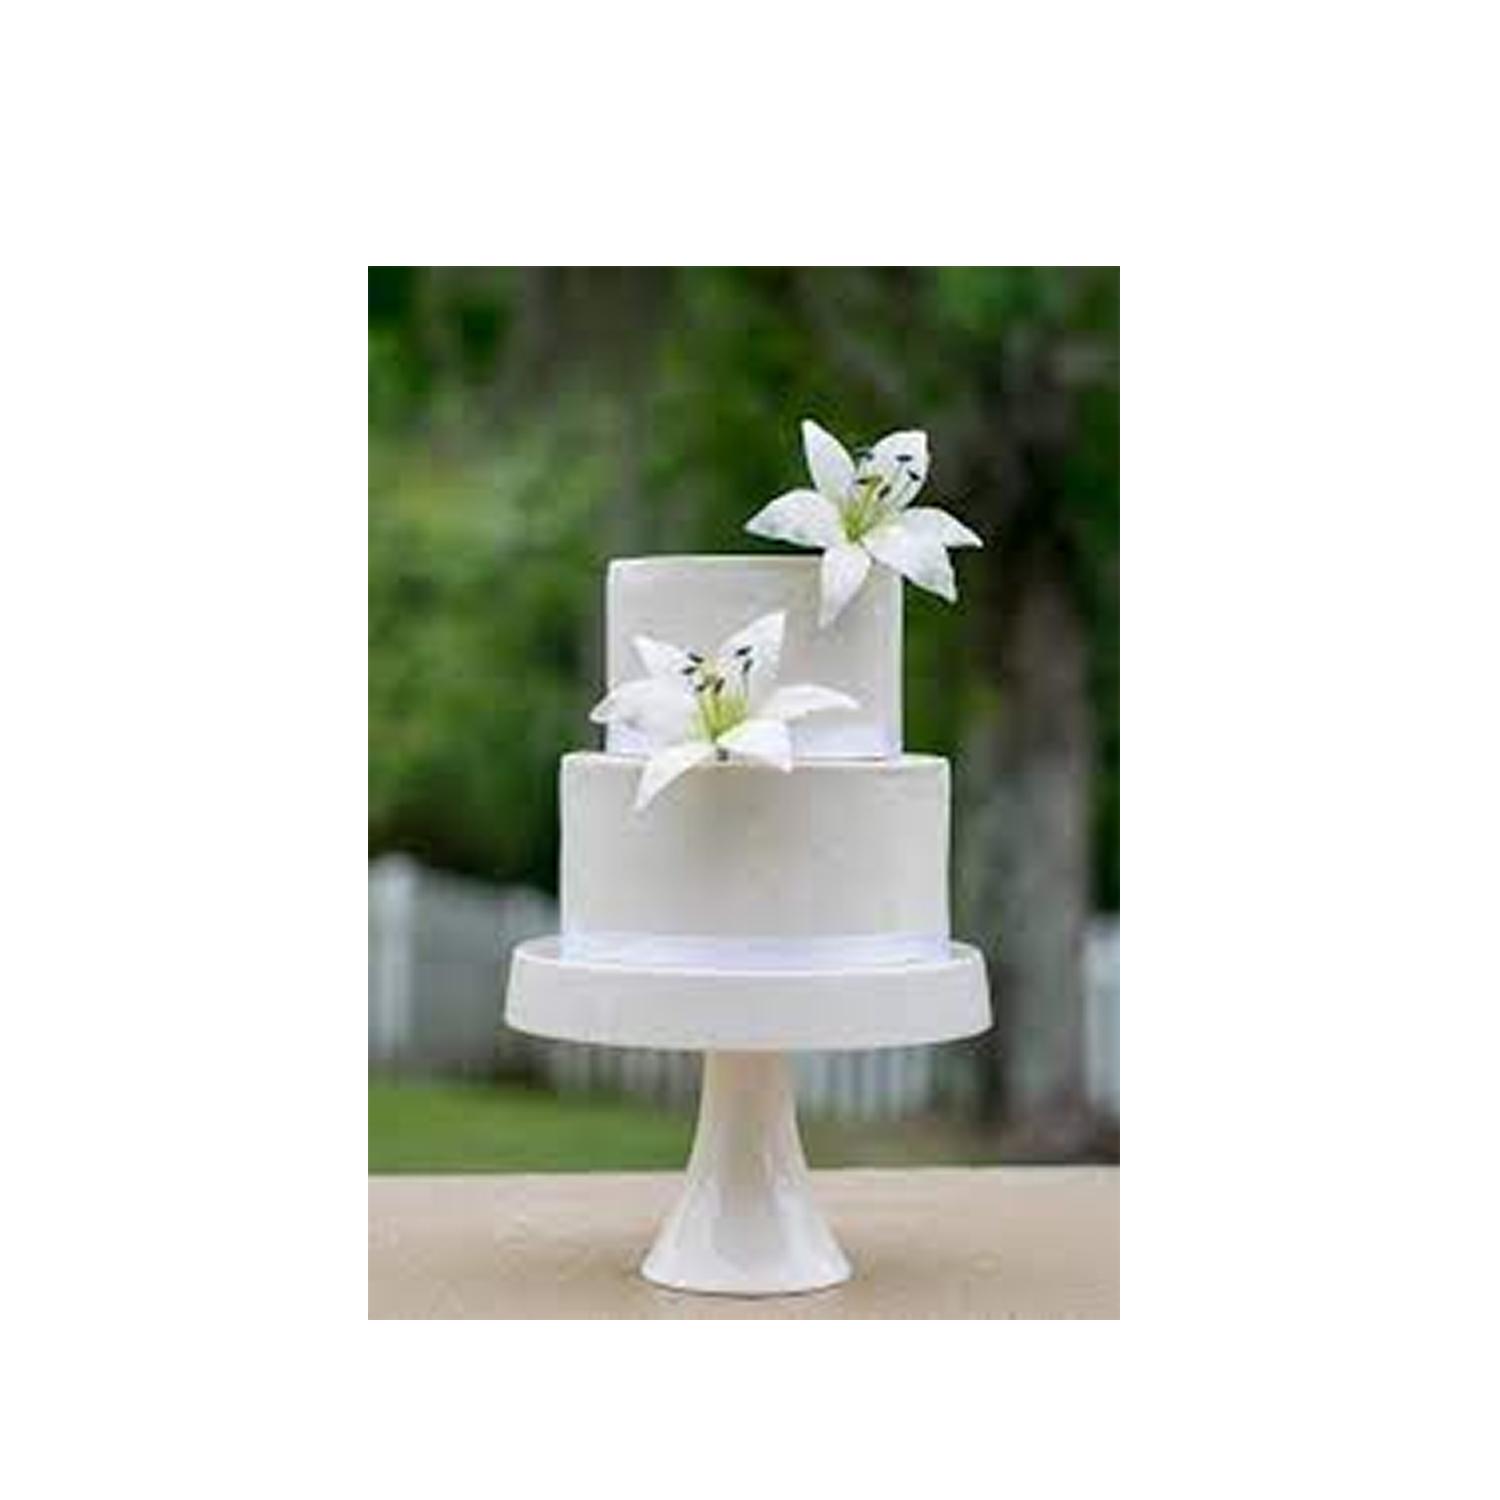 SUPER CAKES LILLIES FLOWERS WHITE